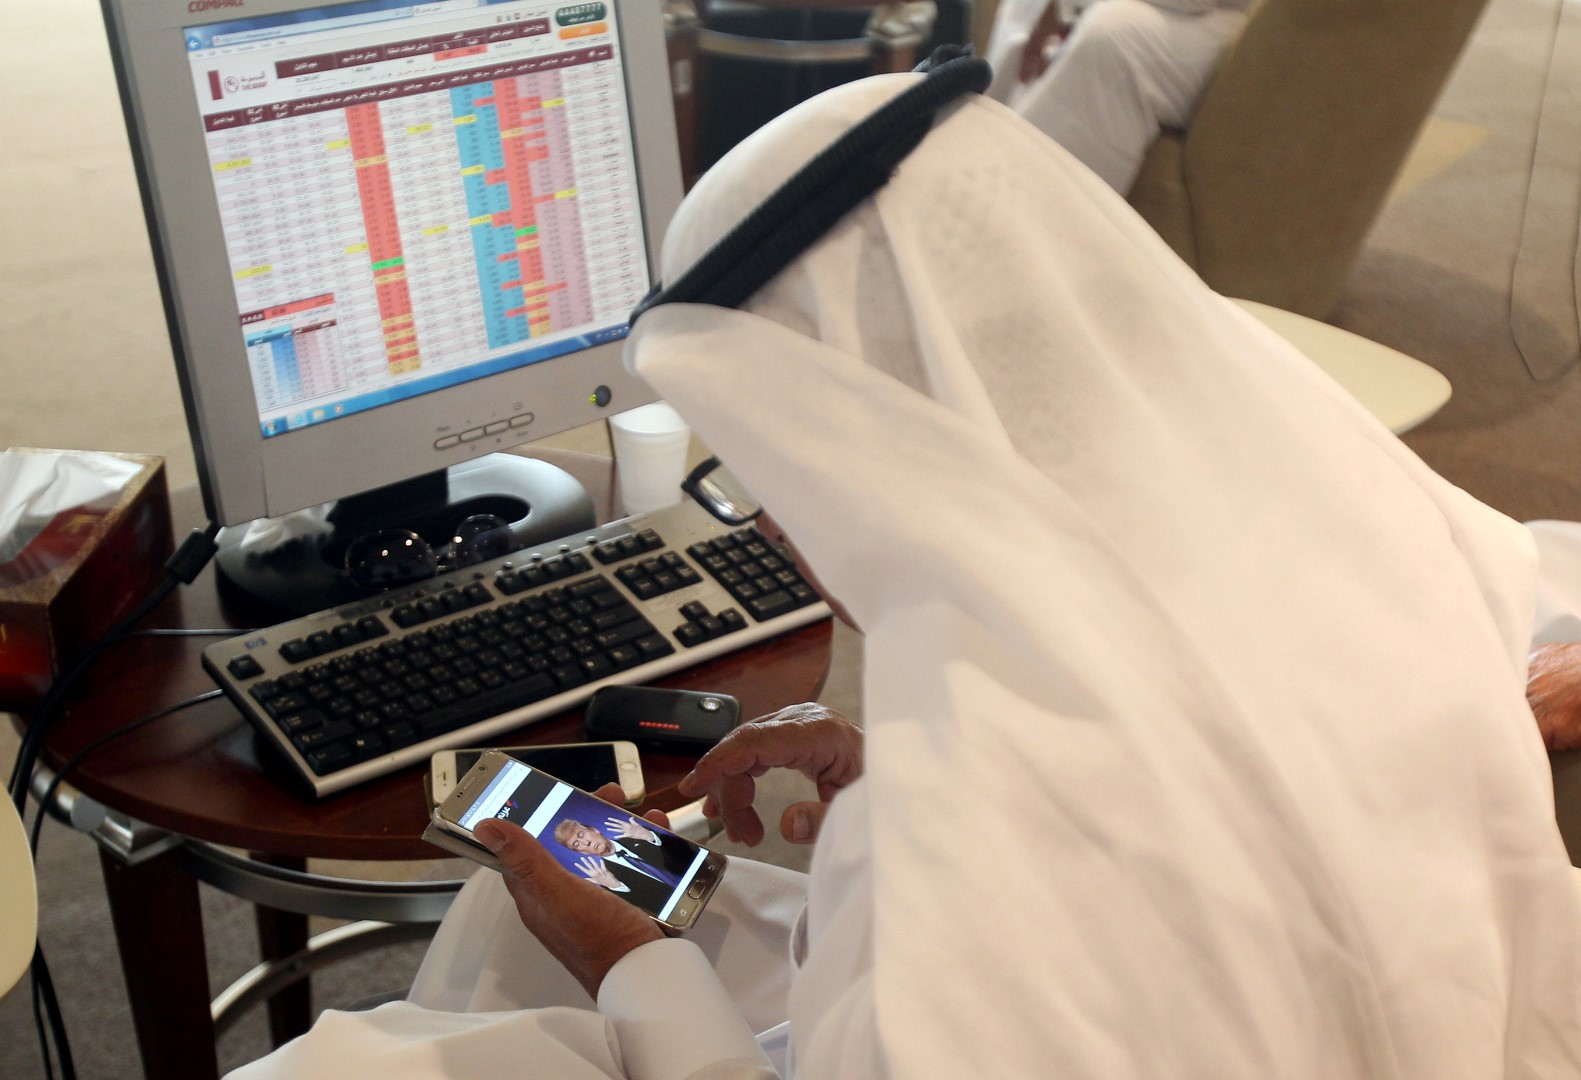 A trader uses his smartphone to follow news of U.S. presidential elections as he monitors a screen displaying stock information at Qatar Stock Exchange in Doha, Qatar November 9, 2016. REUTERS/Naseem Zeitoon - RTX2SQ7Q